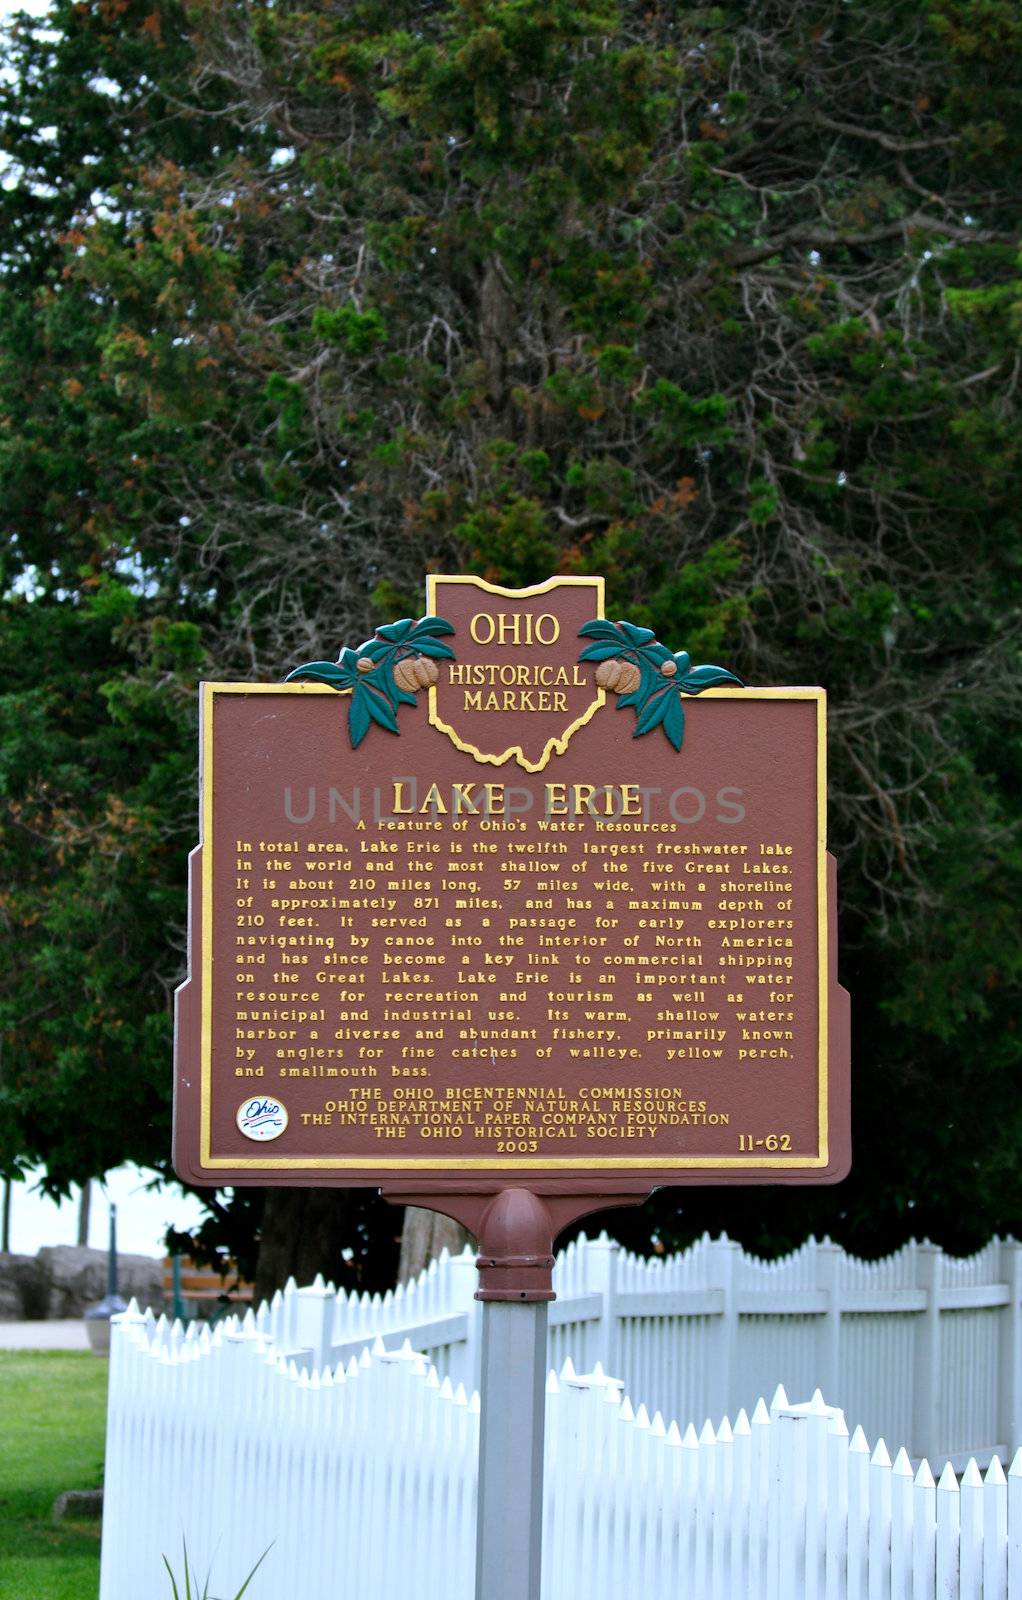 Lake Erie Sign by RefocusPhoto